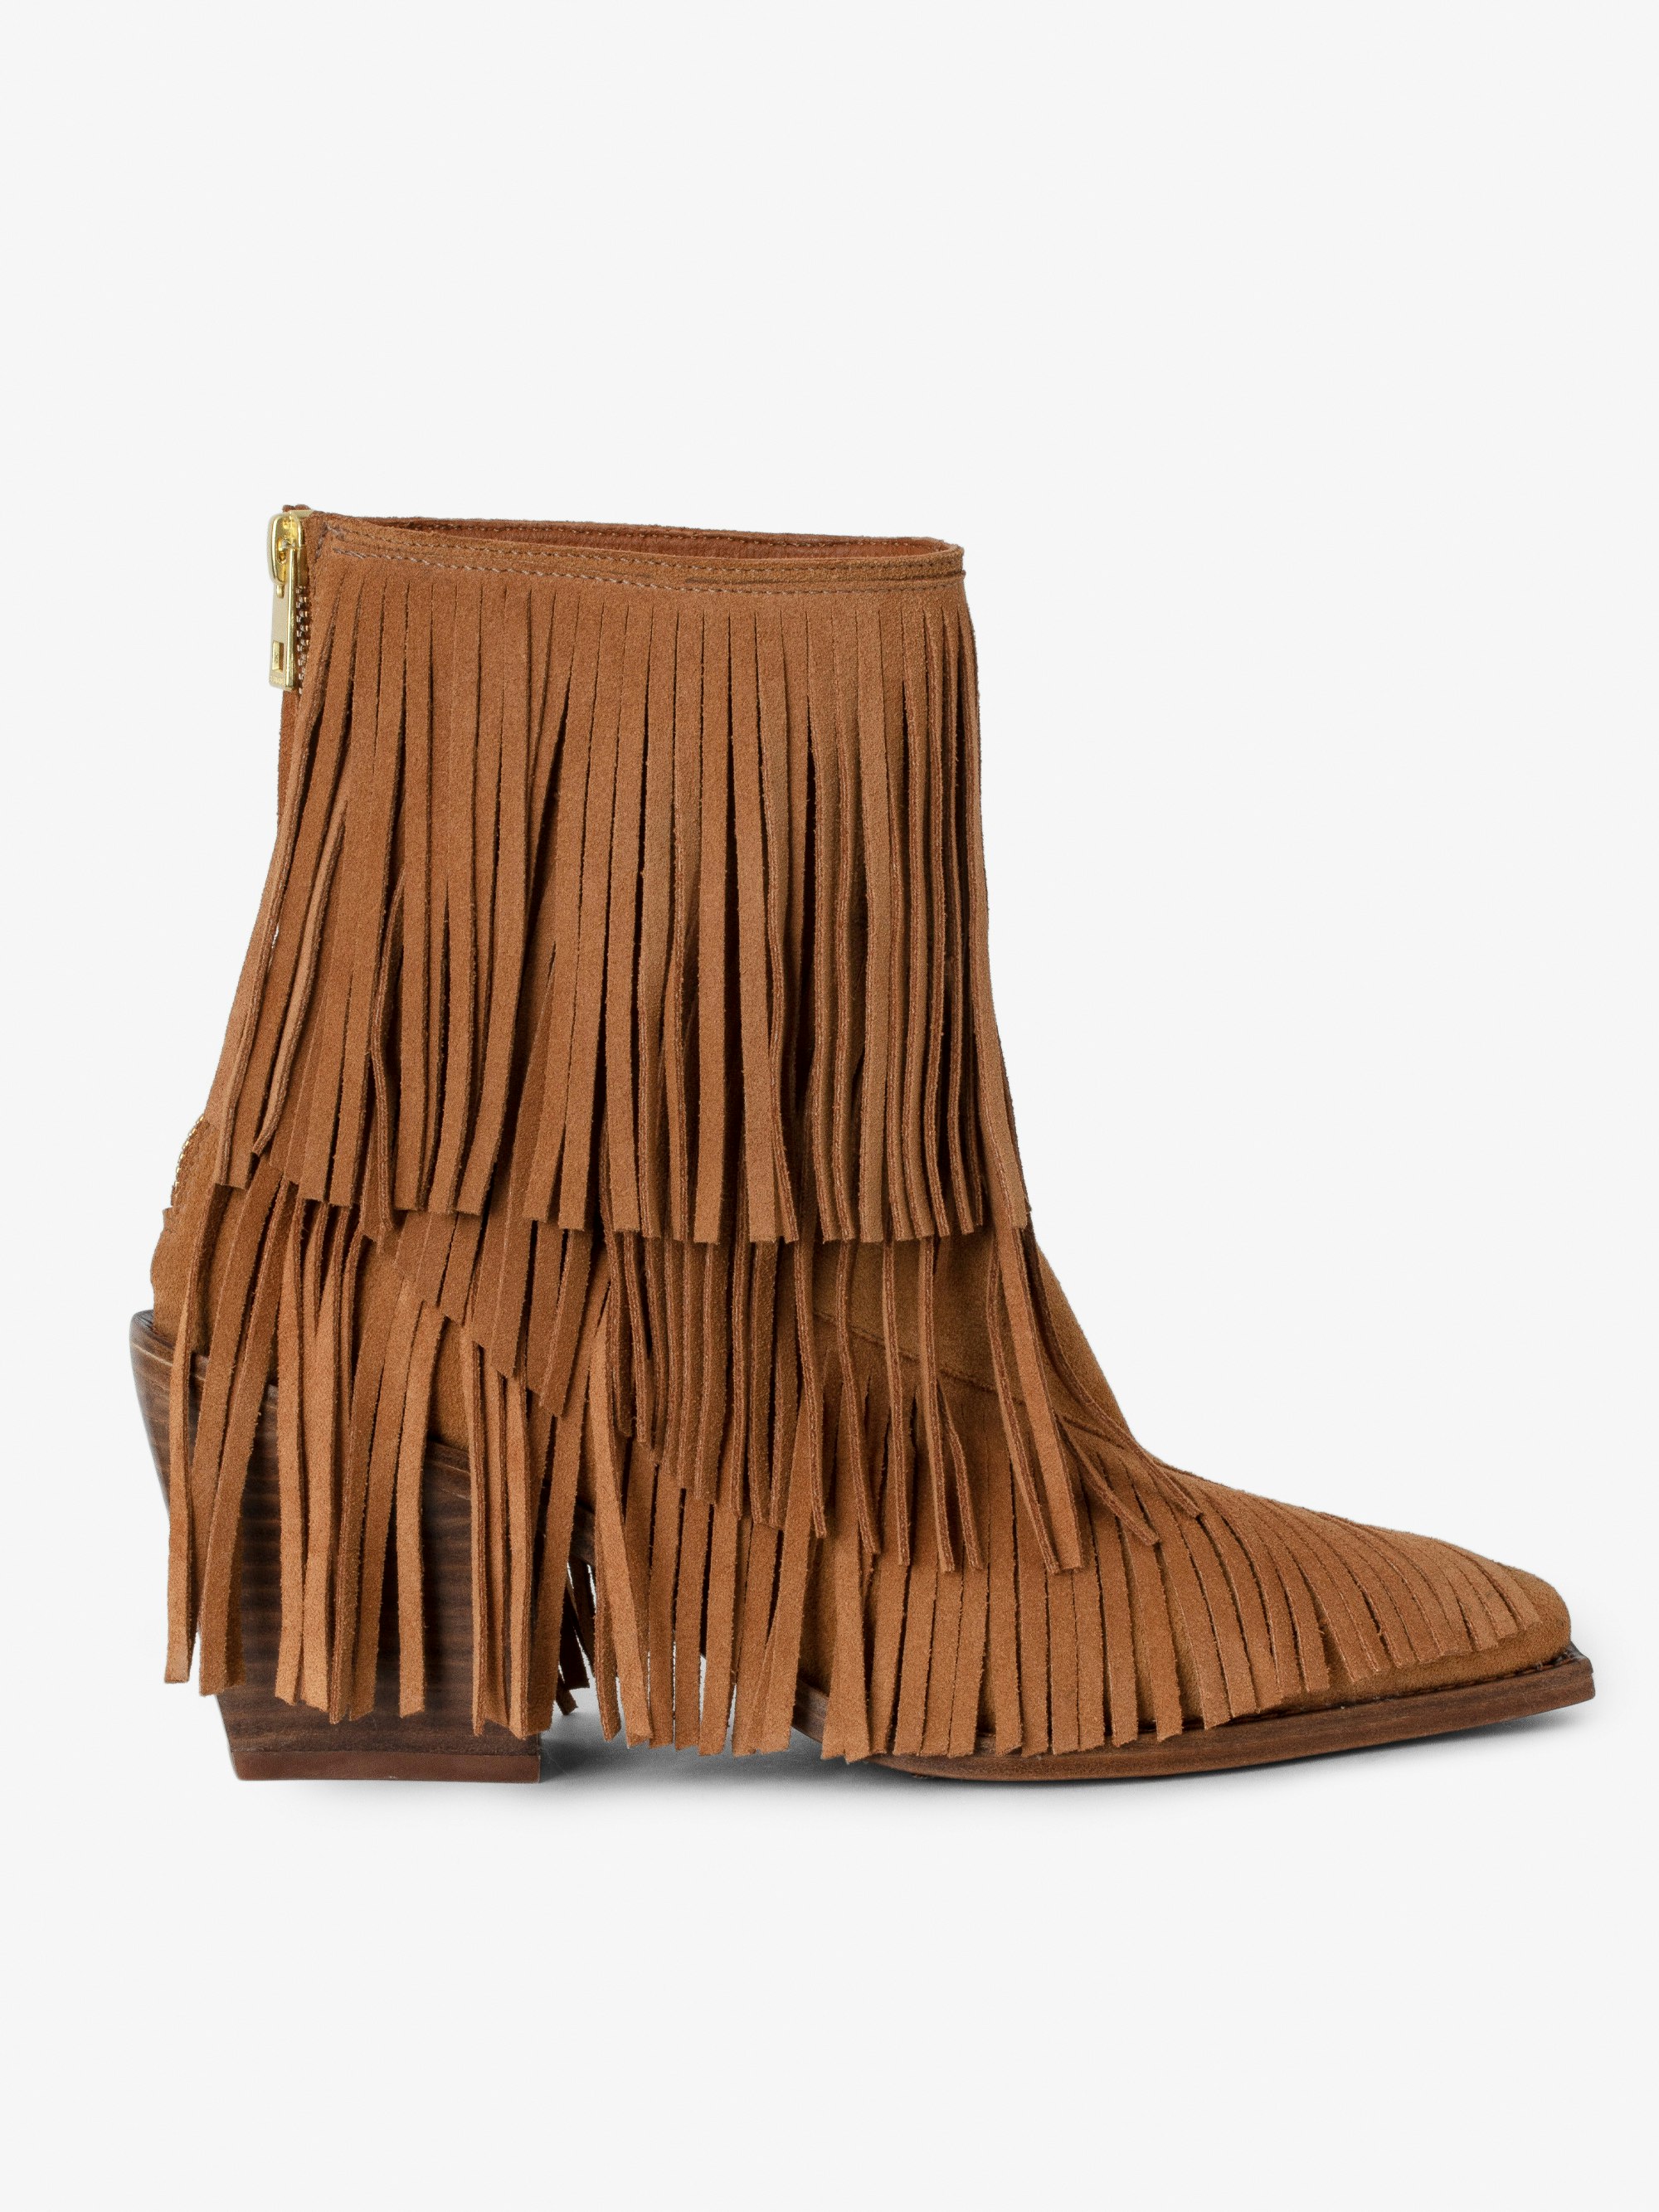 Cara Suede Ankle Boots - Fringed suede ankle boots.